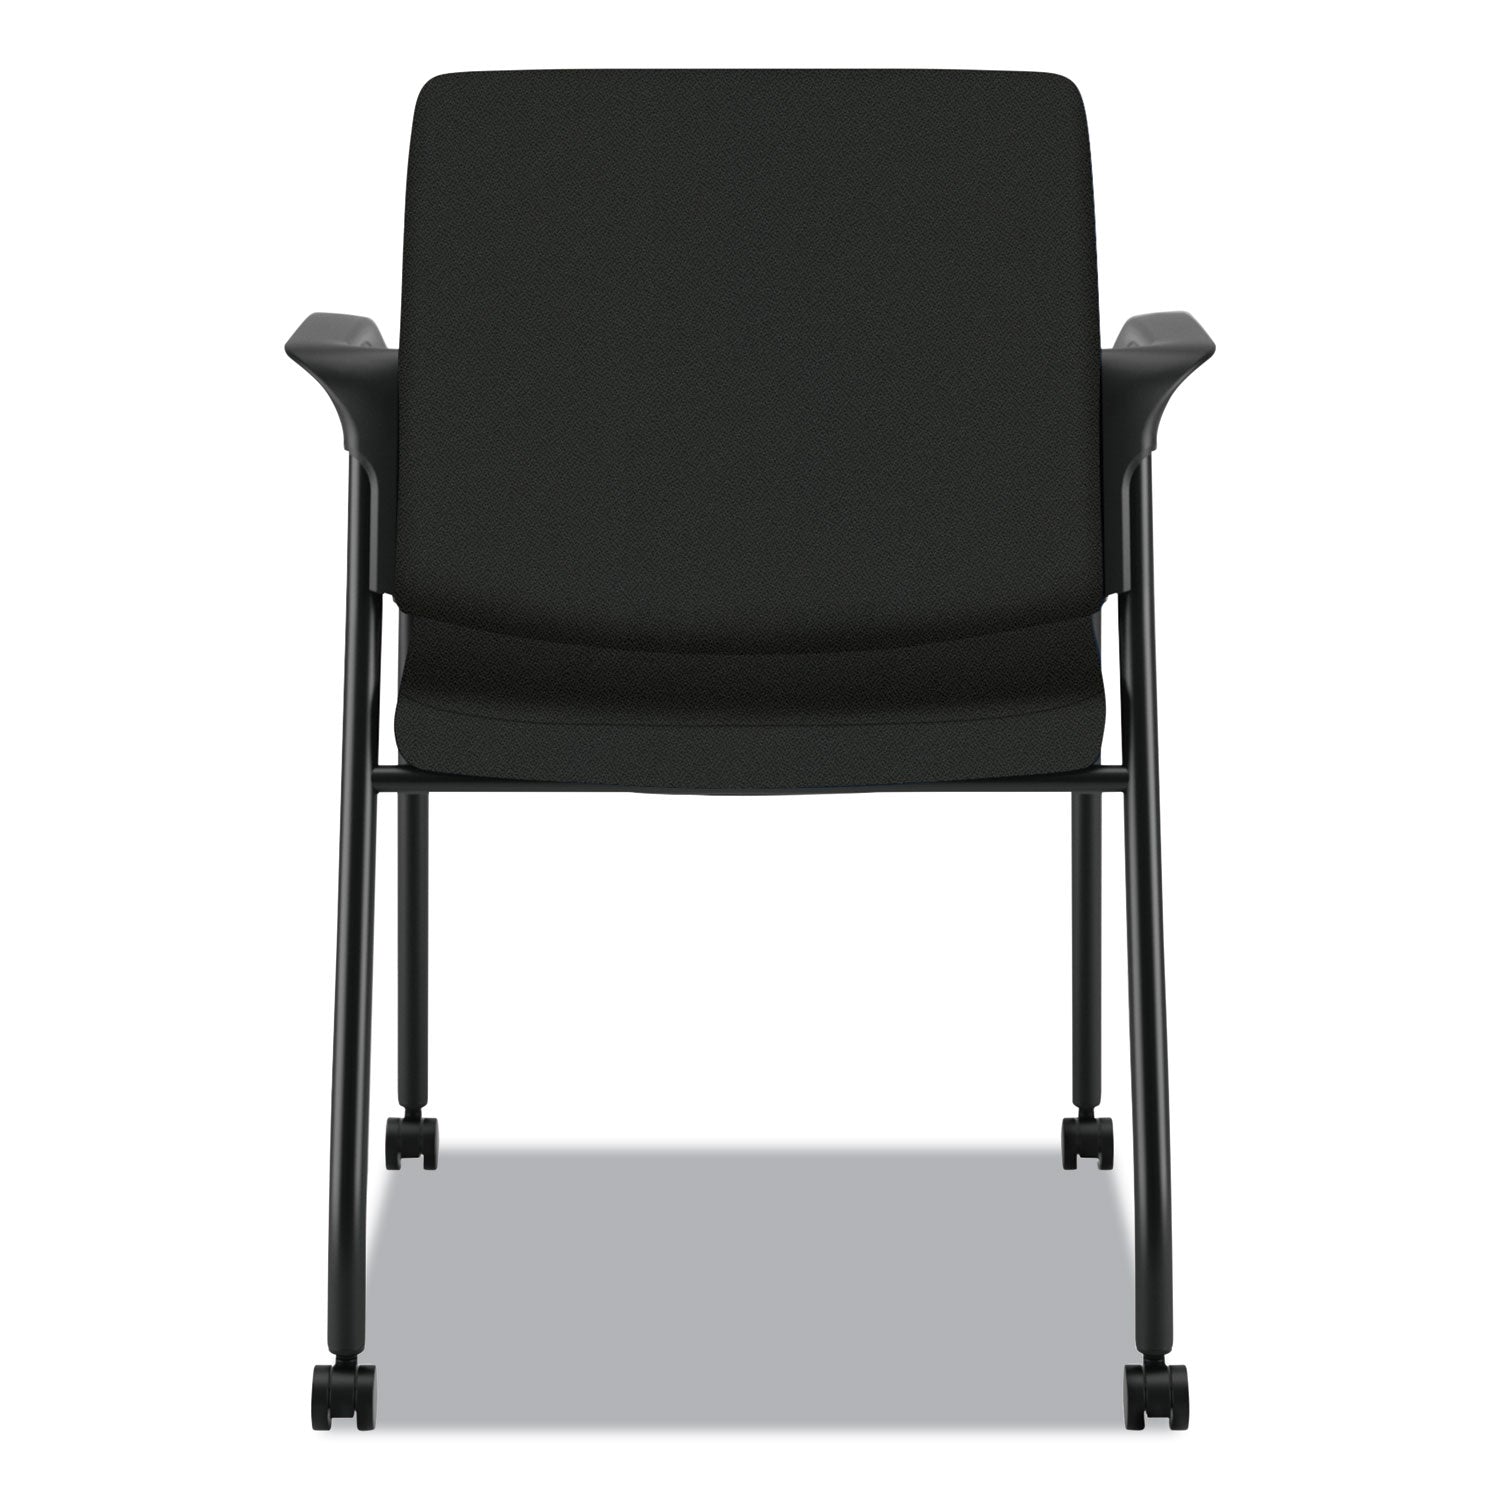 ignition-series-guest-chair-with-arms-polyester-fabric-seat-25-x-2175-x-335-black-ships-in-7-10-business-days_honis109hcu10 - 3